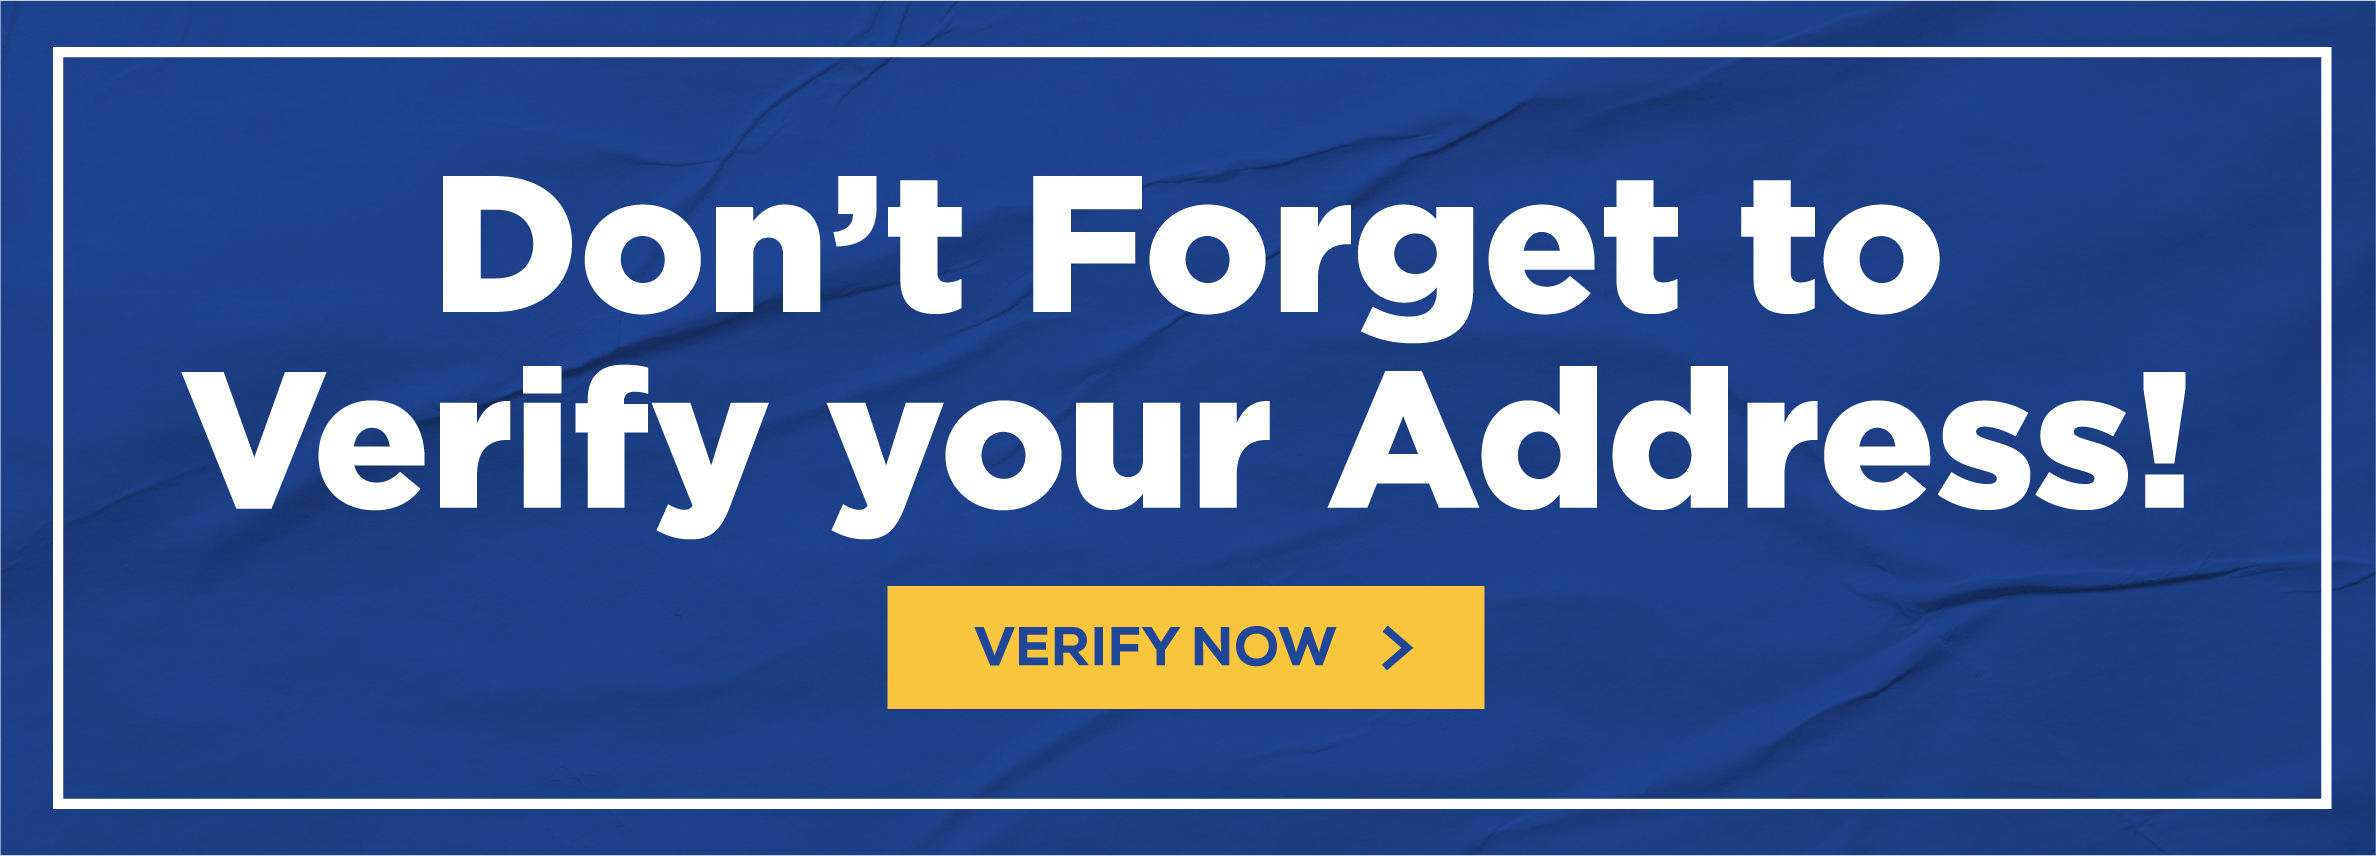 Don't Forget to Verify your Address!, Verify Now